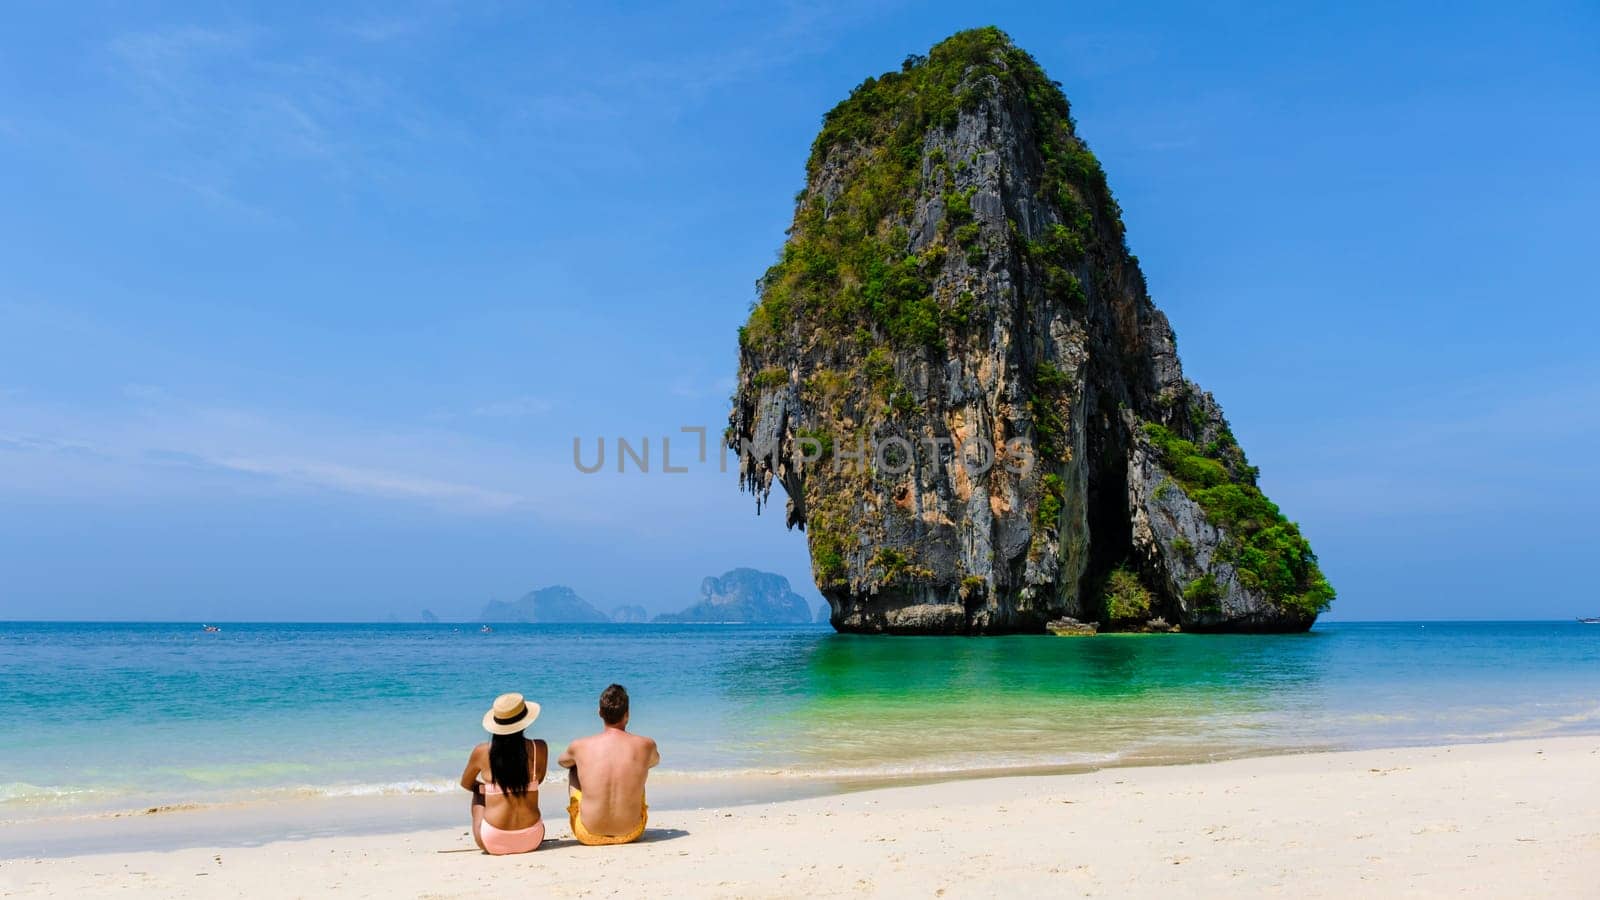 men and women relaxing on the beach during a vacation in Thailand Railay Beach Krabi. a diverse couple sitting on the beach, tropical beach in Thailand